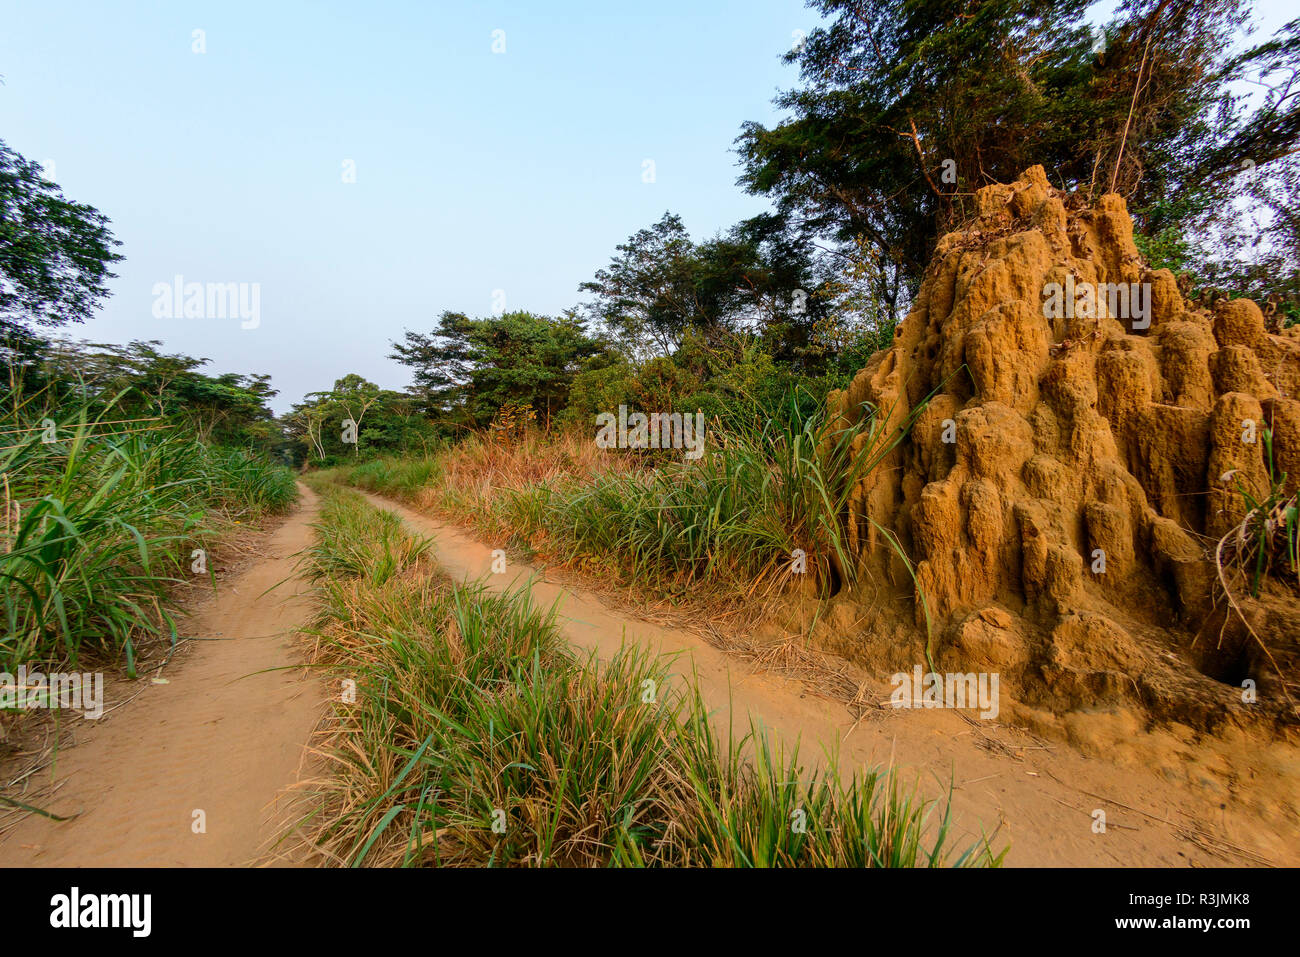 Termite (Macrotermes sp) mound with multiple spires. Odzala-Kokoua National Park. Cuvette-Ouest Region. Republic of the Congo Stock Photo